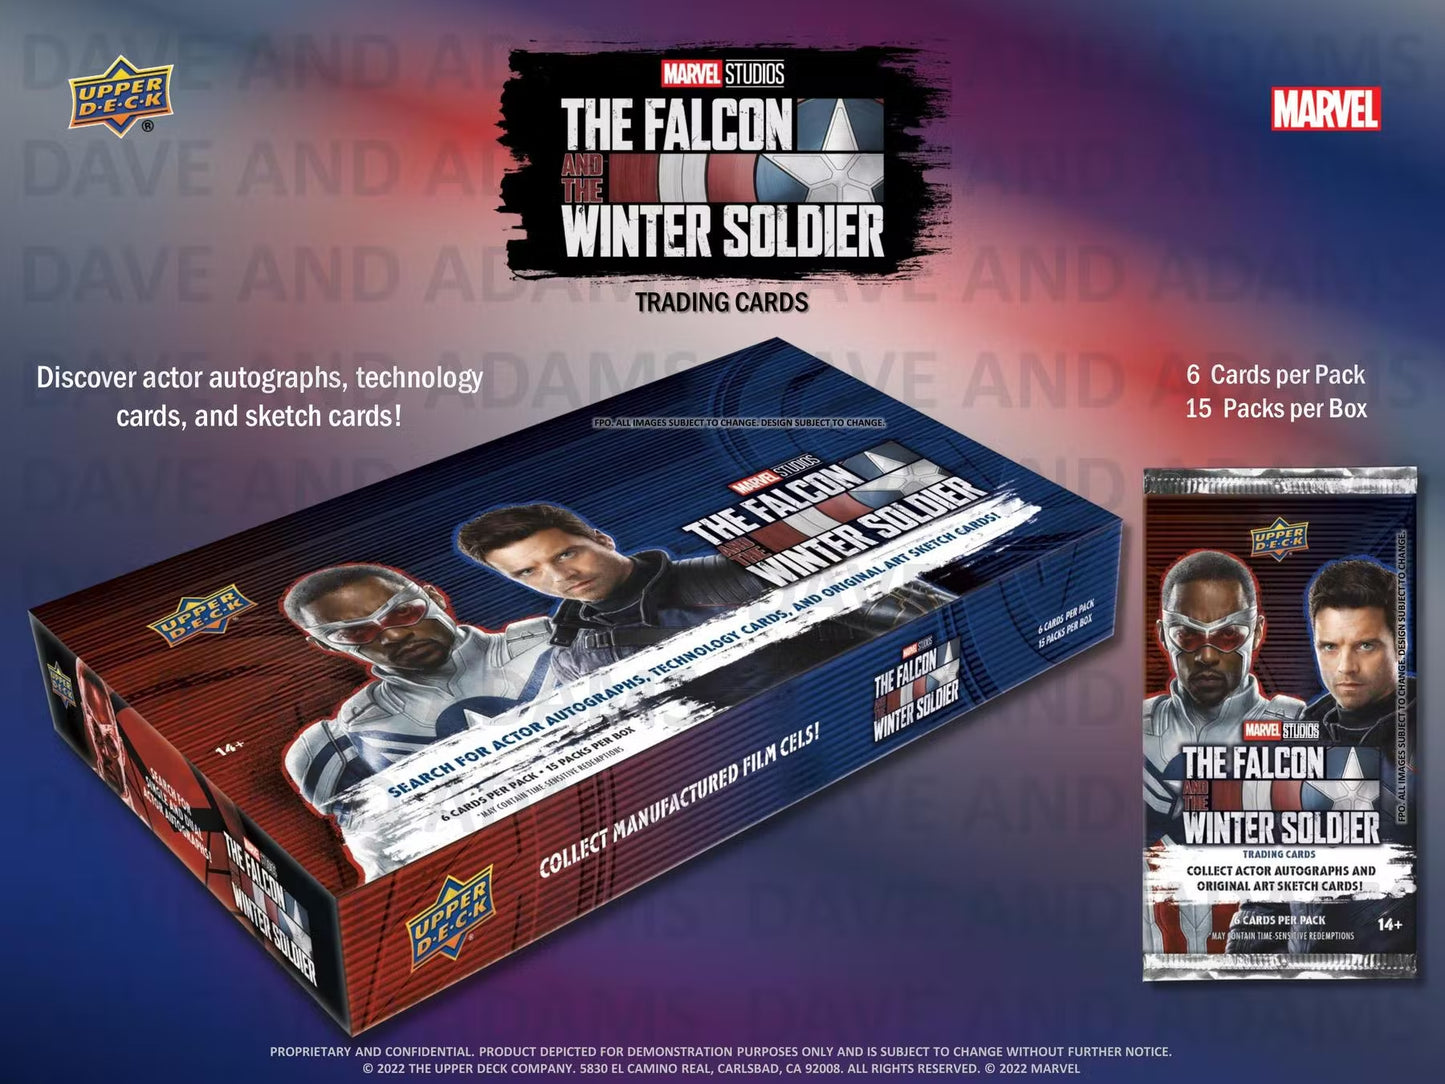 Marvel Studios The Falcon and the Winter Soldier Trading Cards